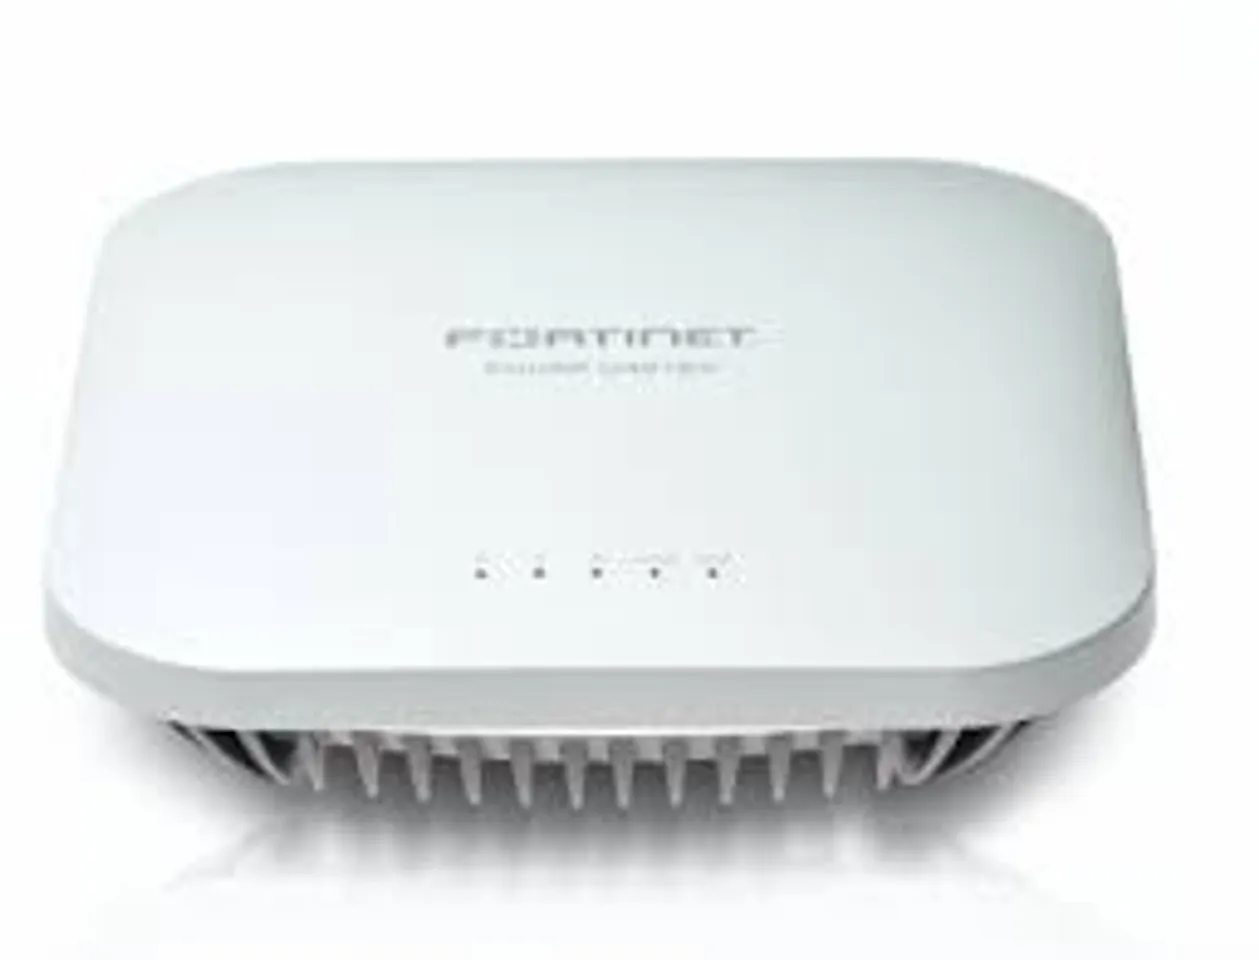 Fortinet Launches Industry’s First Universal Wireless Access Points